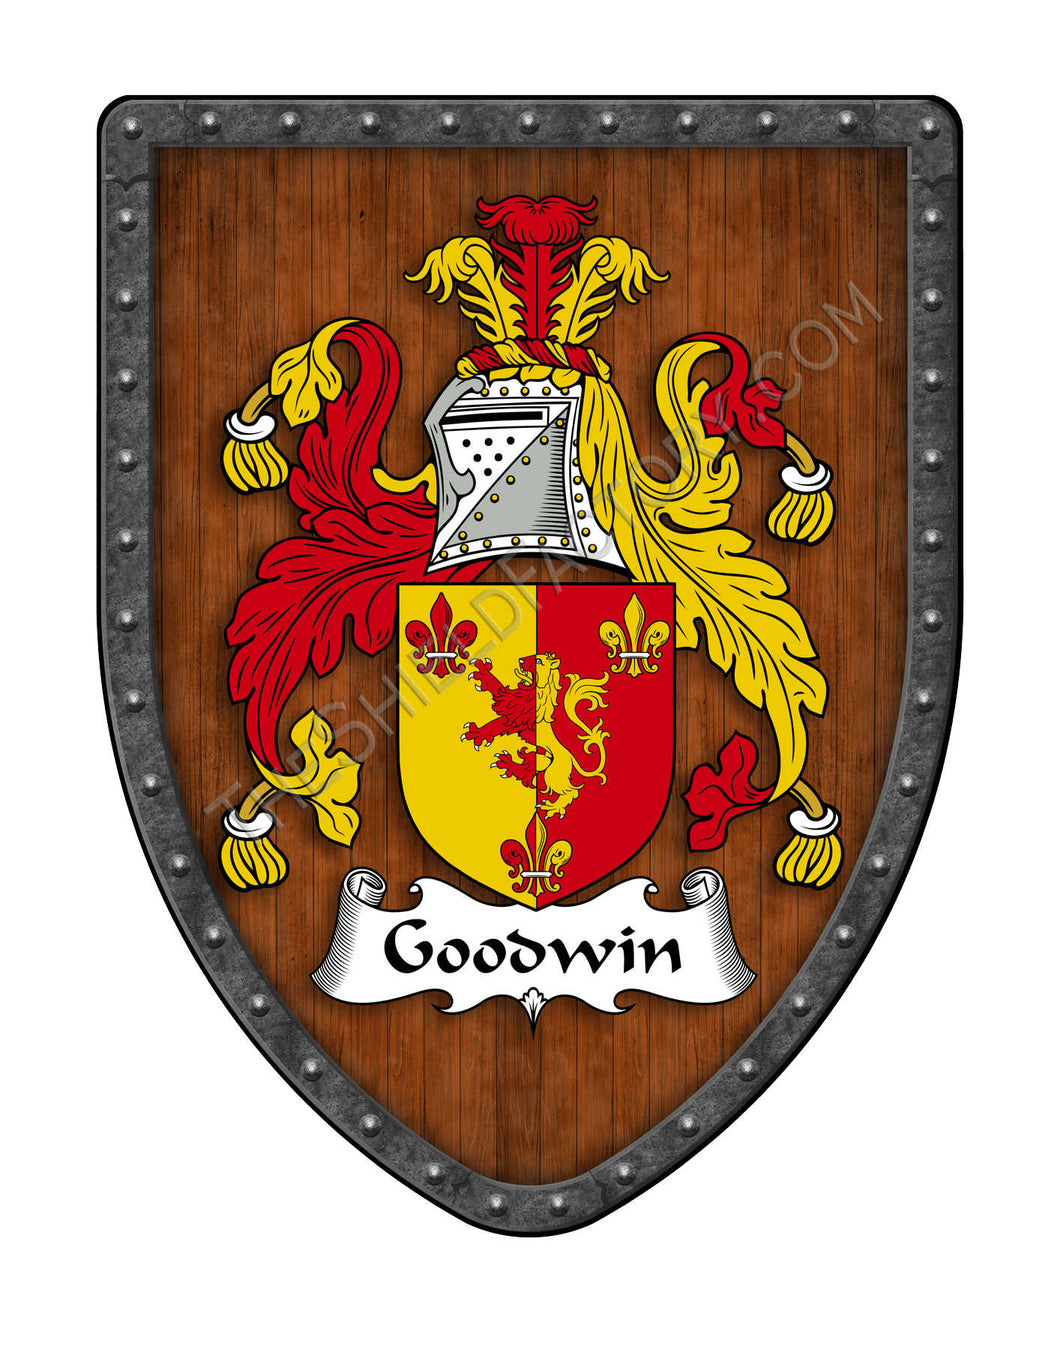 Goodwin Family Crest Coat of Arms